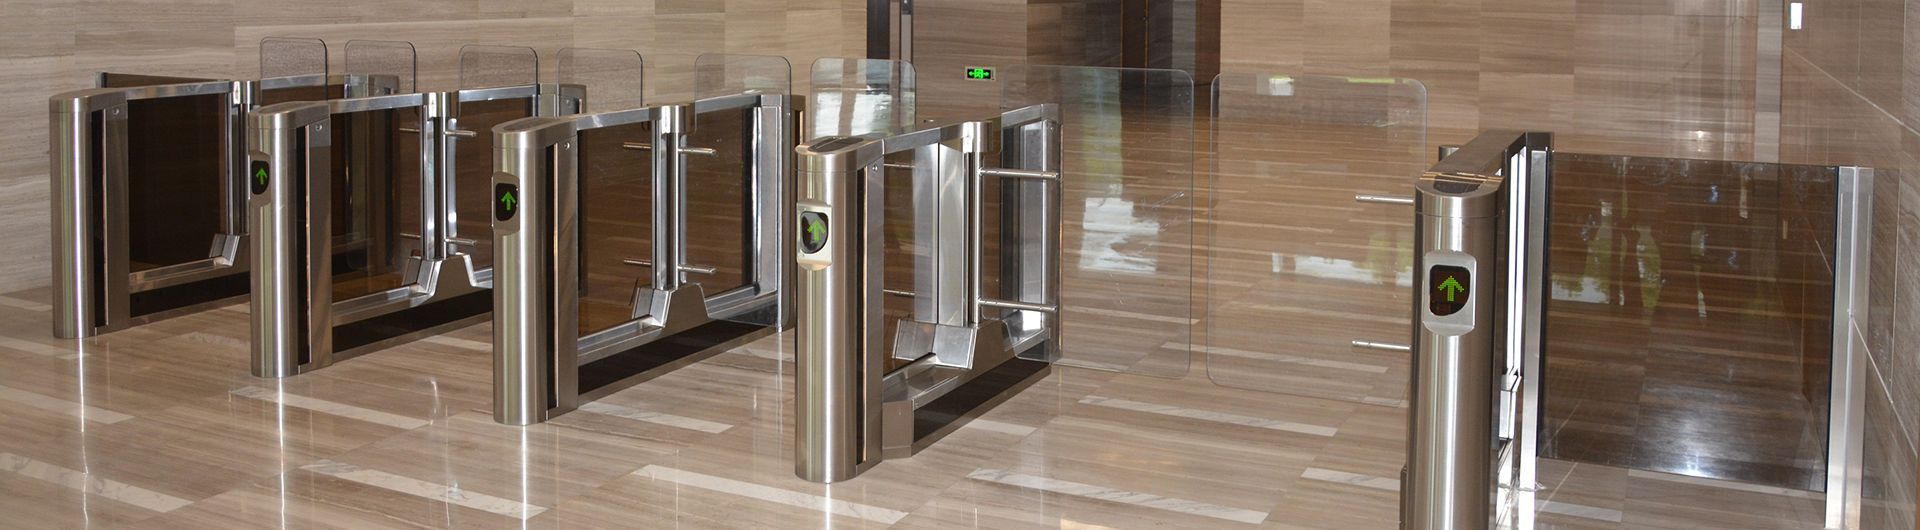 Swing Barrier Turnstile Gate Installation at Chinese Government